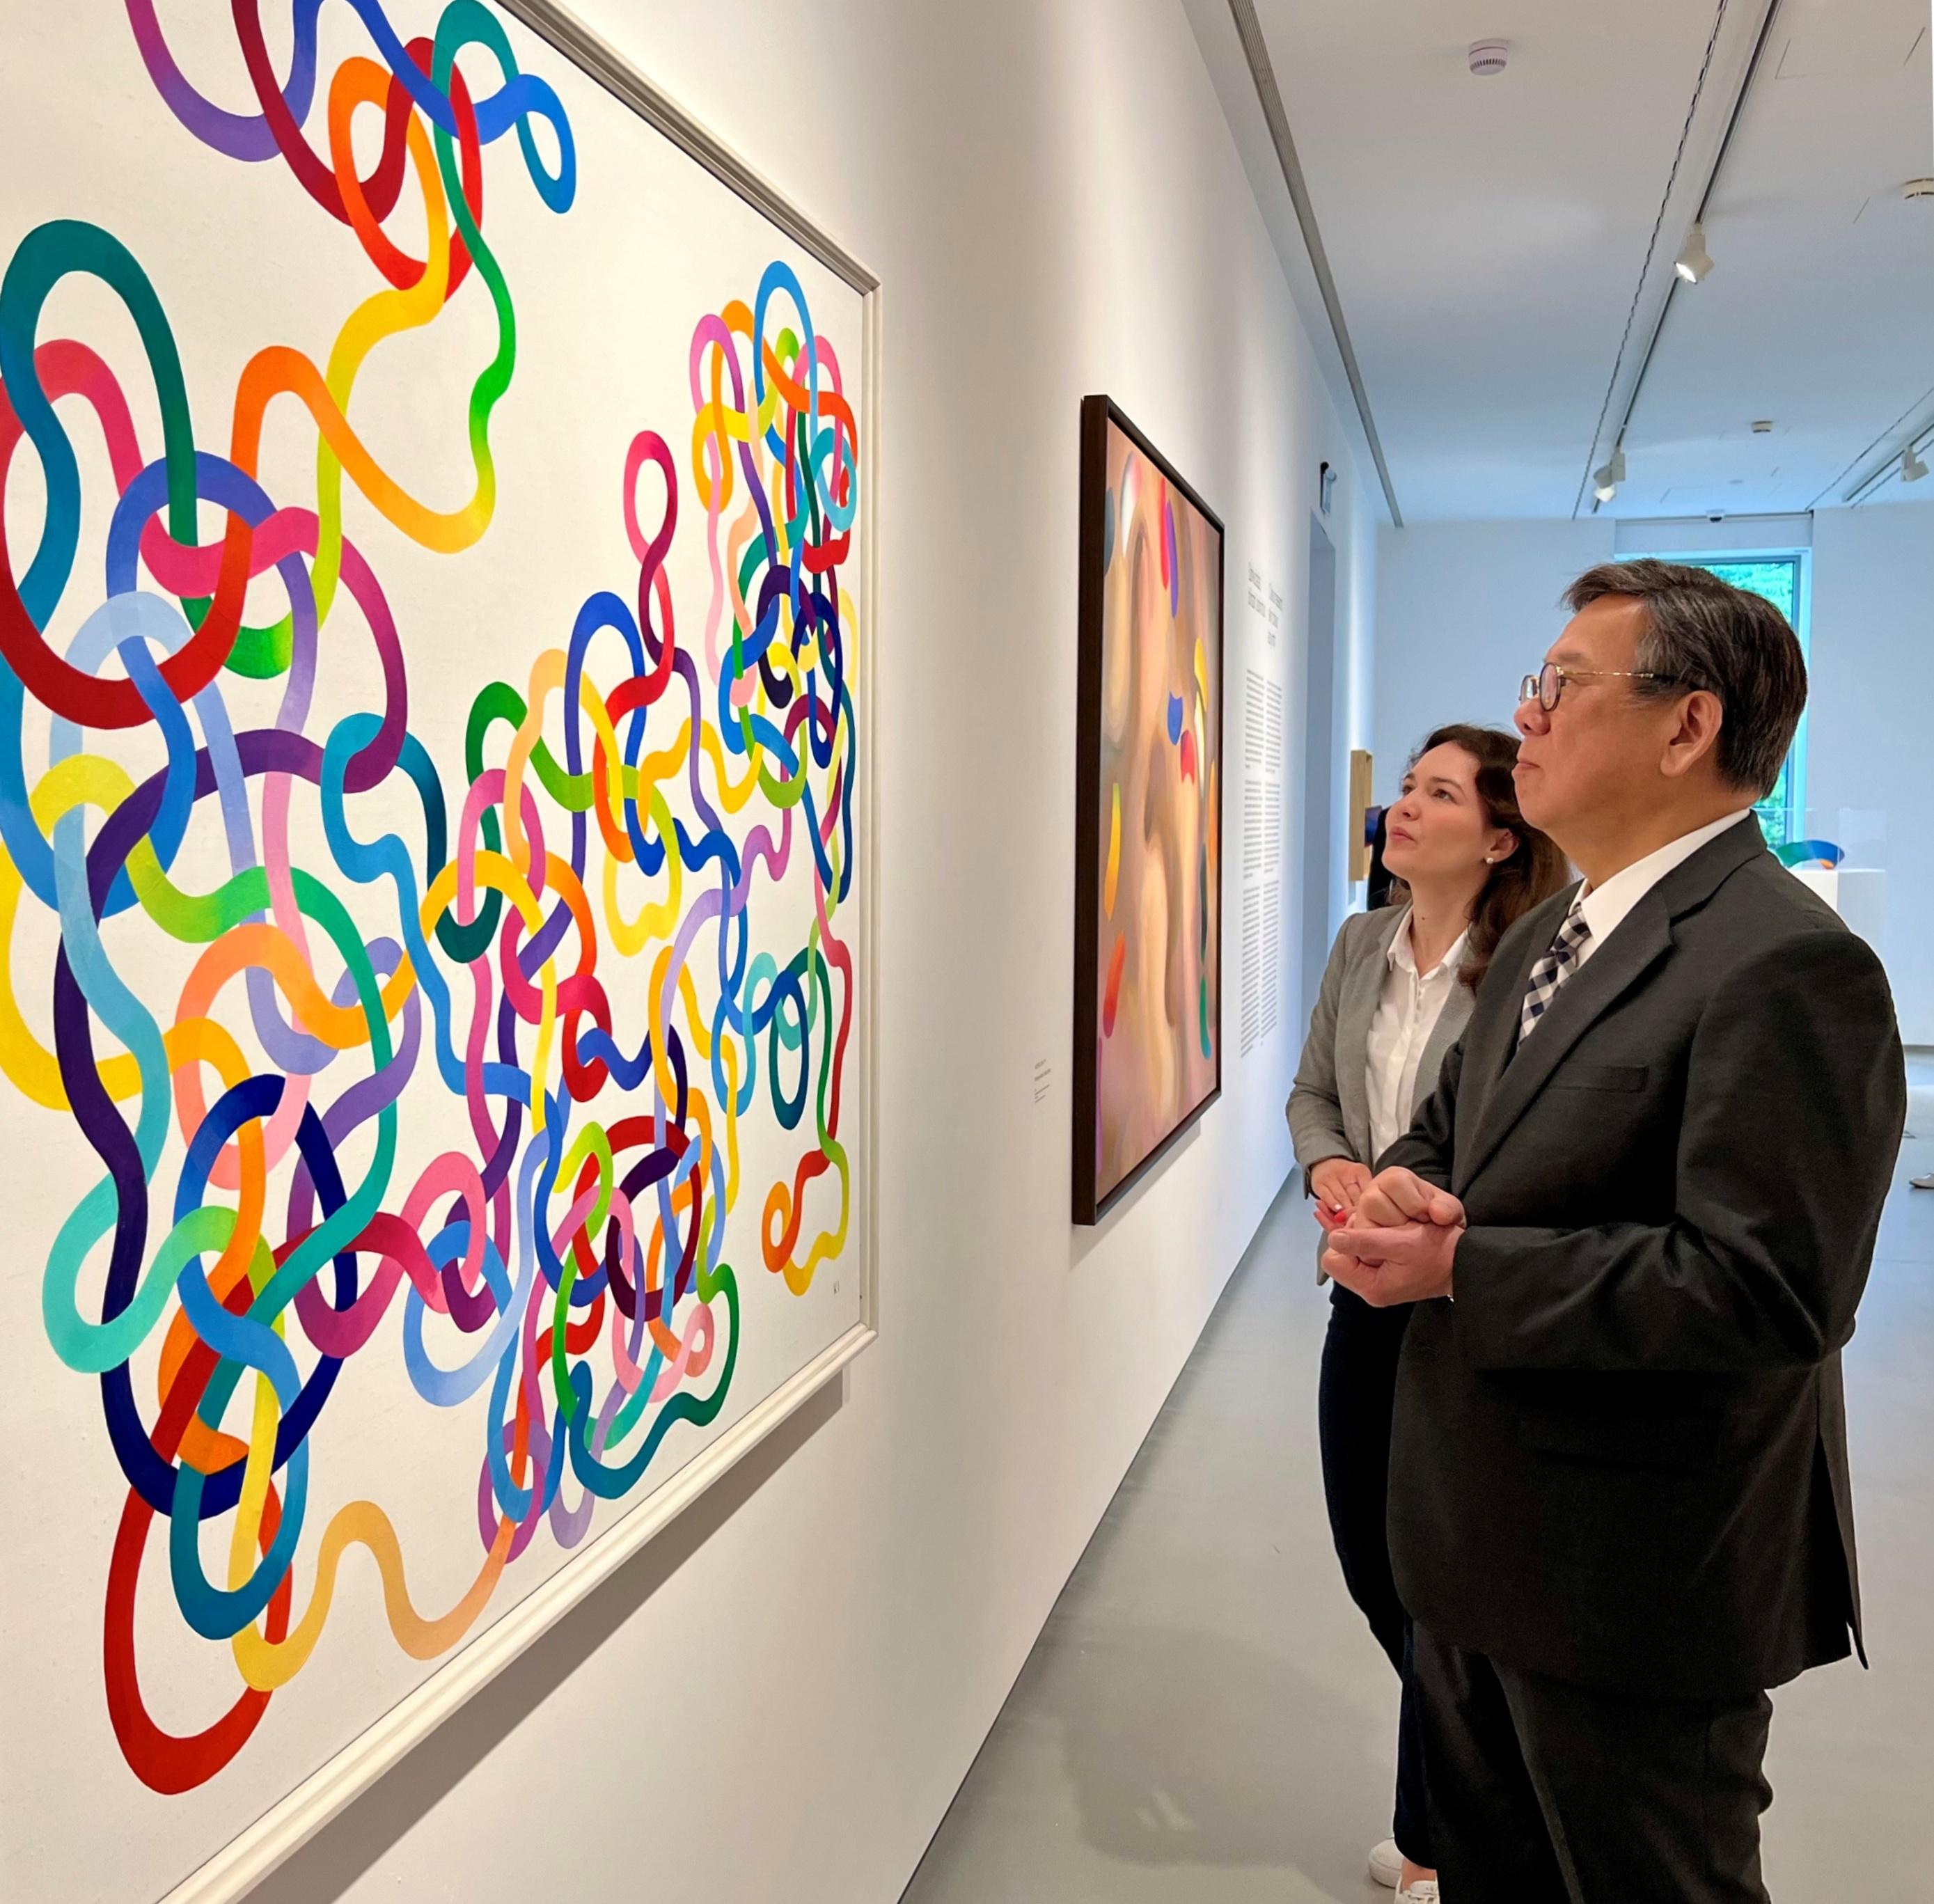 The Secretary for Commerce and Economic Development, Mr Algernon Yau (right), visits Q Contemporary, an art museum founded by a Hong Kong-born businesswoman, in Budapest, Hungary, today (June 9, Budapest time).